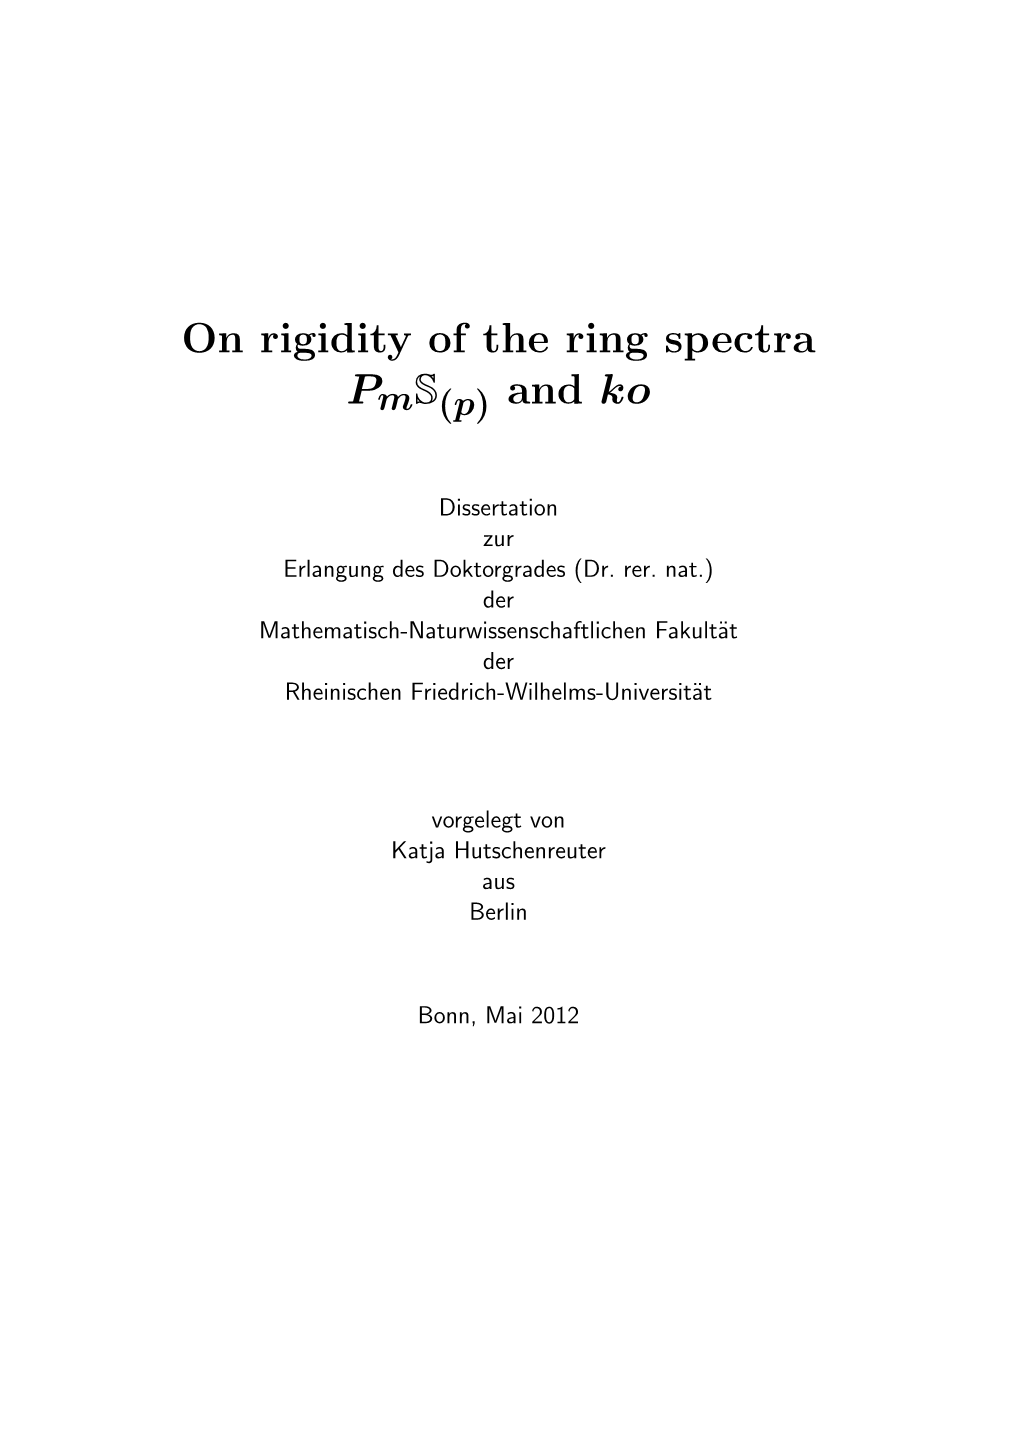 On Rigidity of the Ring Spectra Pms(P) and Ko